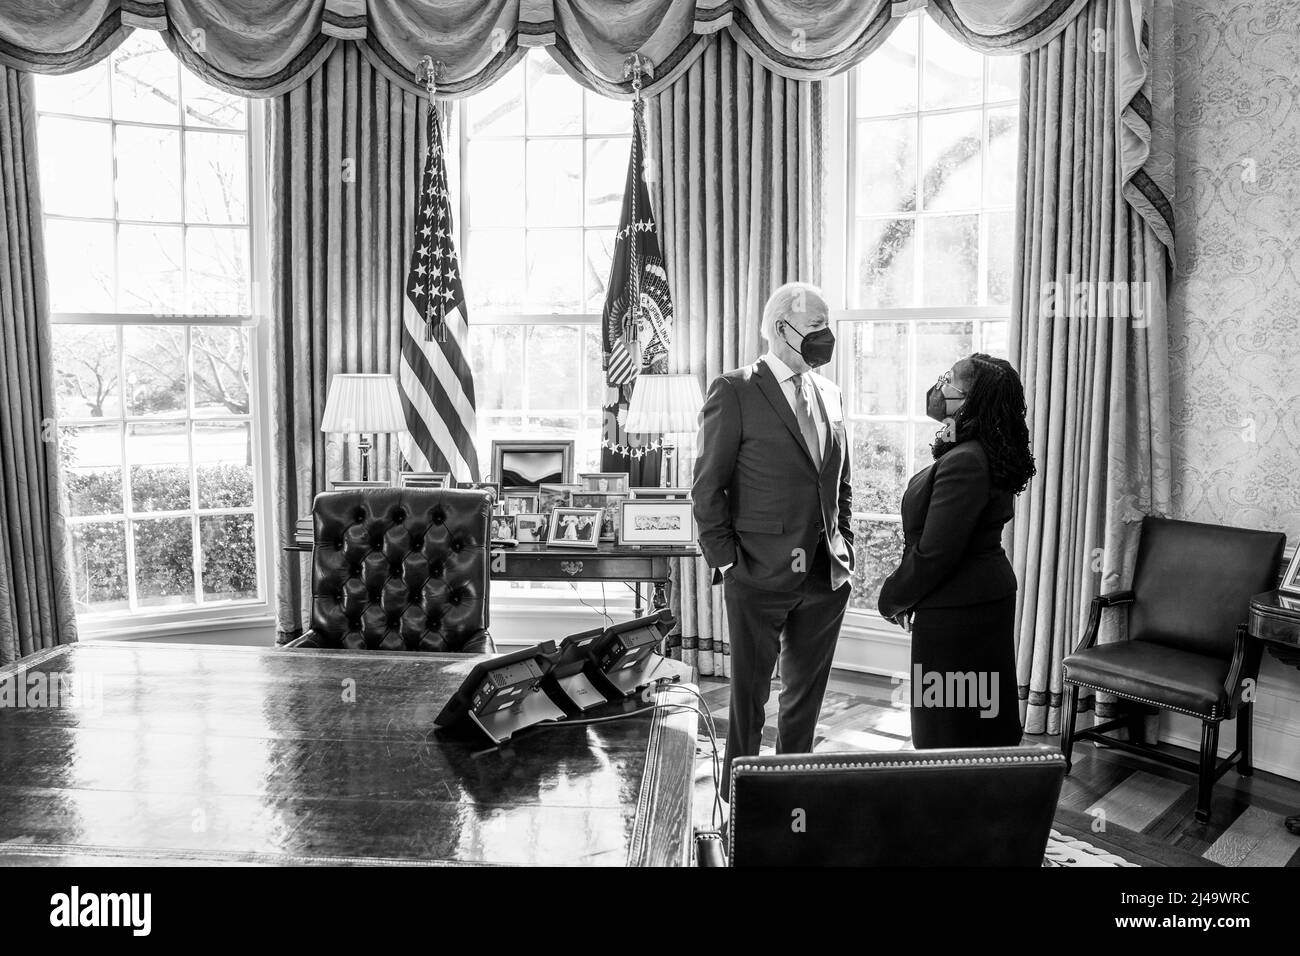 President Joe Biden meets Judge Ketanji Brown Jackson in the Oval Office, Friday, February 25, 2022, prior to announcing her nomination to the U.S. Supreme Court. (Official White House Photo by Adam Schultz) Stock Photo